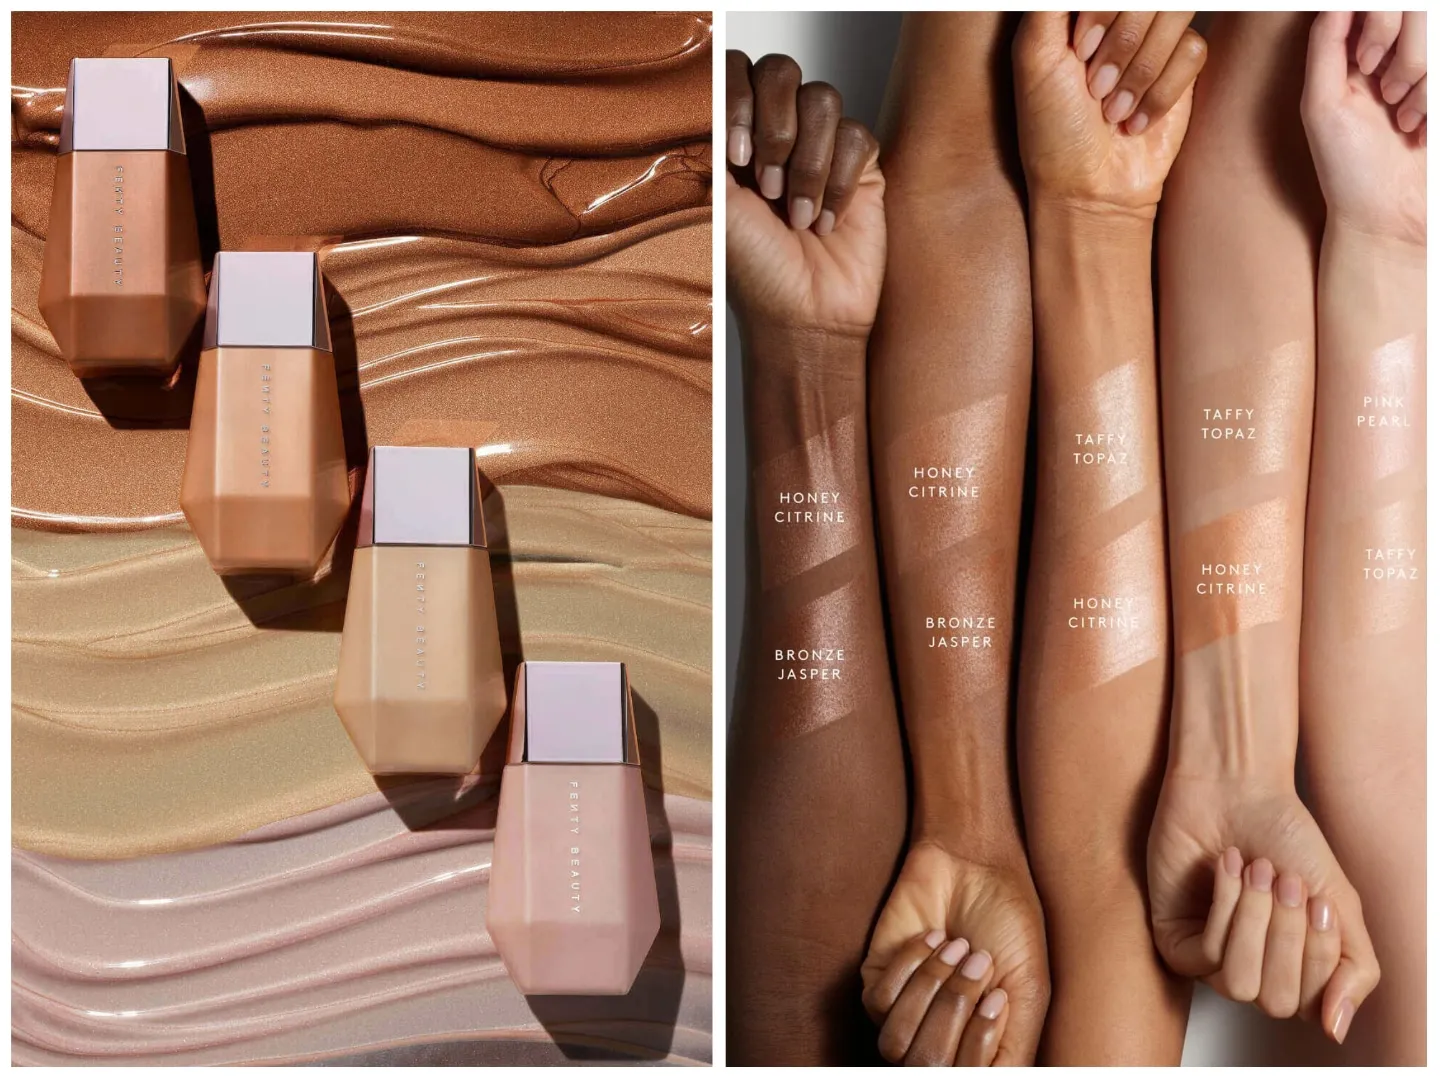 Fenty Beauty's latest product combines skincare and makeup